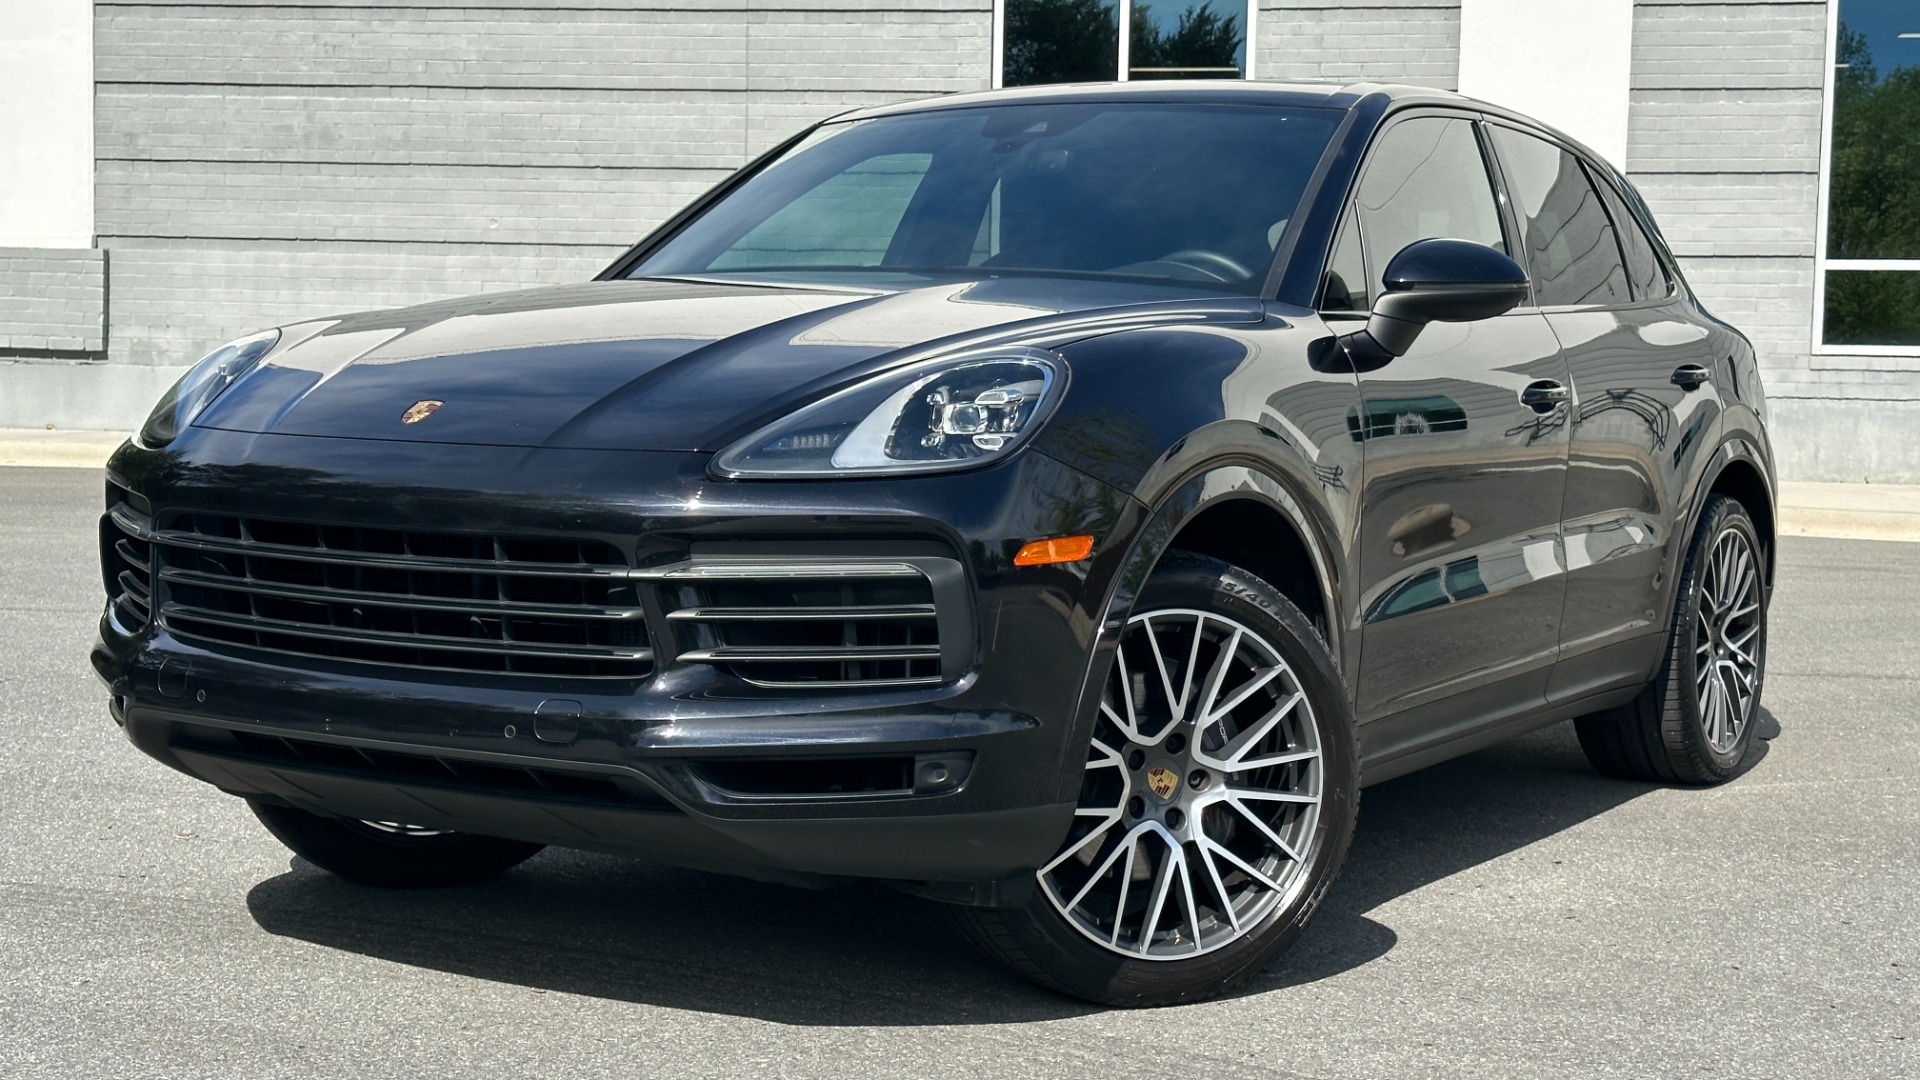 Used 2019 Porsche Cayenne AWD / PREMIUM / TOWING PKG / BOSE AUDIO / GLOSS BLACK TRIM for sale $54,995 at Formula Imports in Charlotte NC 28227 1